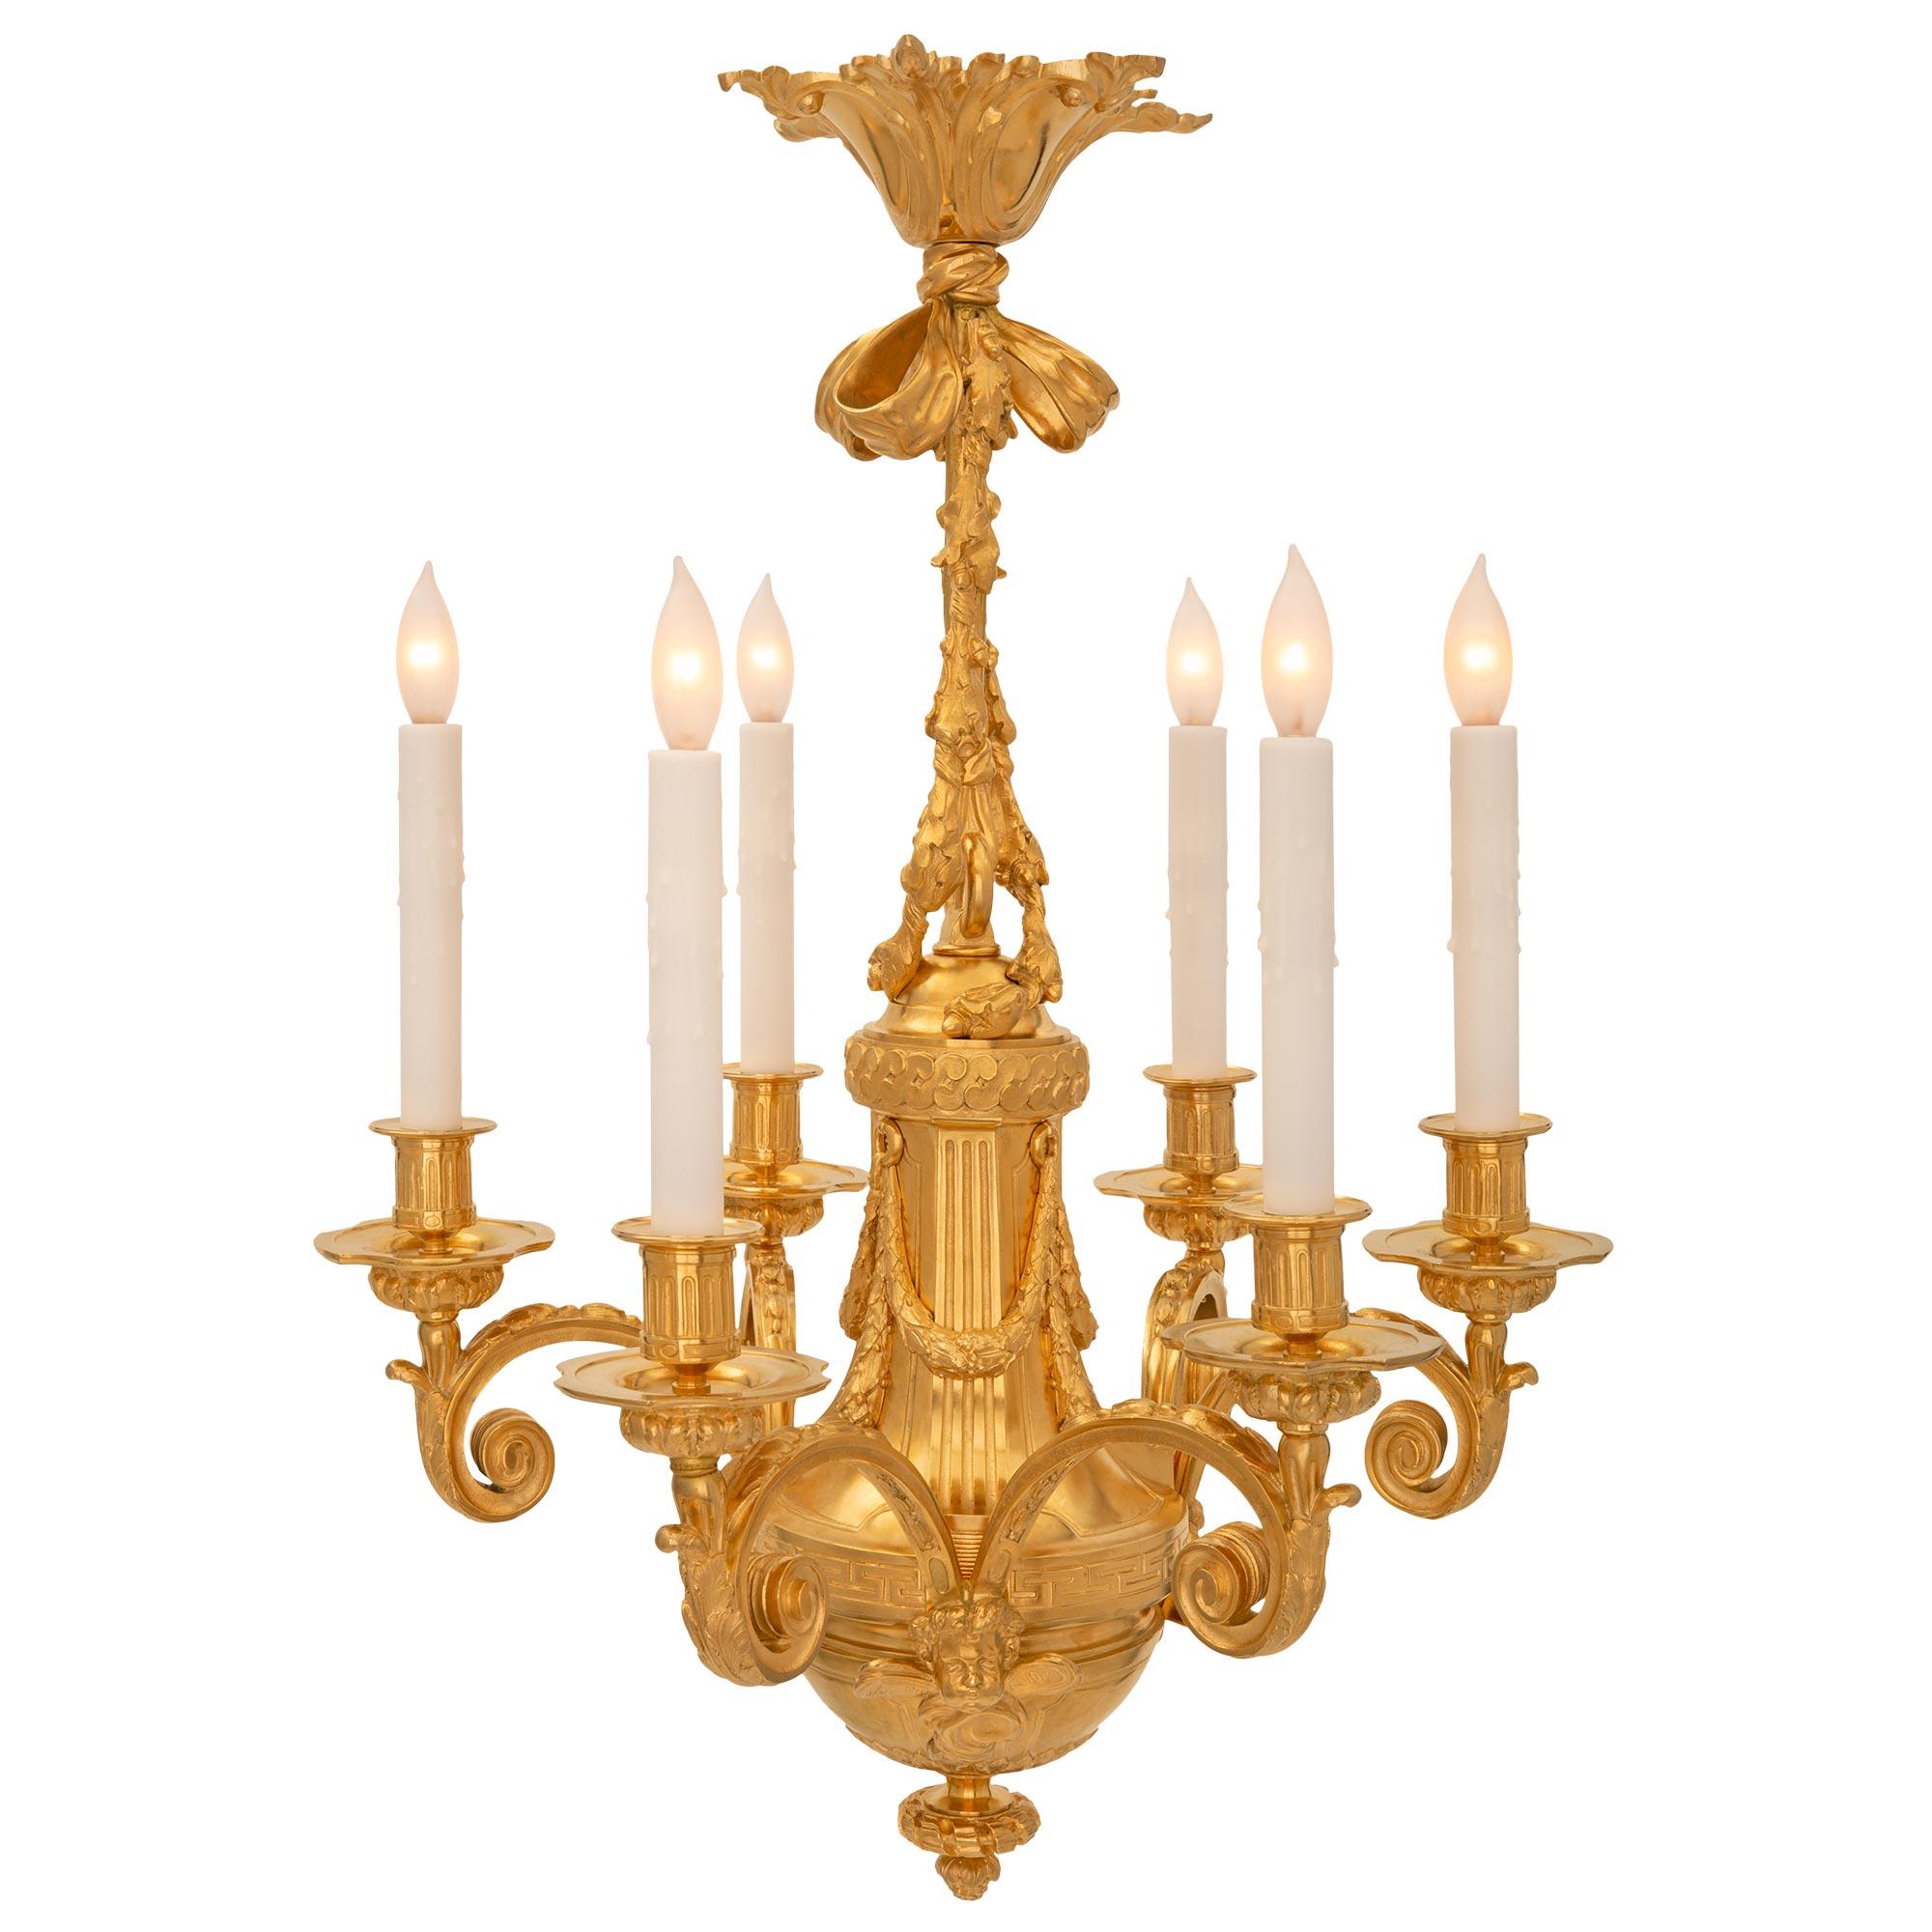 A superb French 19th century Louis XVI st. ormolu chandelier. The six arm chandelier is centered by an elegant bottom acorn shaped and twisted ribbon finial below the dome shaped body. Three pairs of elegantly scrolled arms branch out from charming